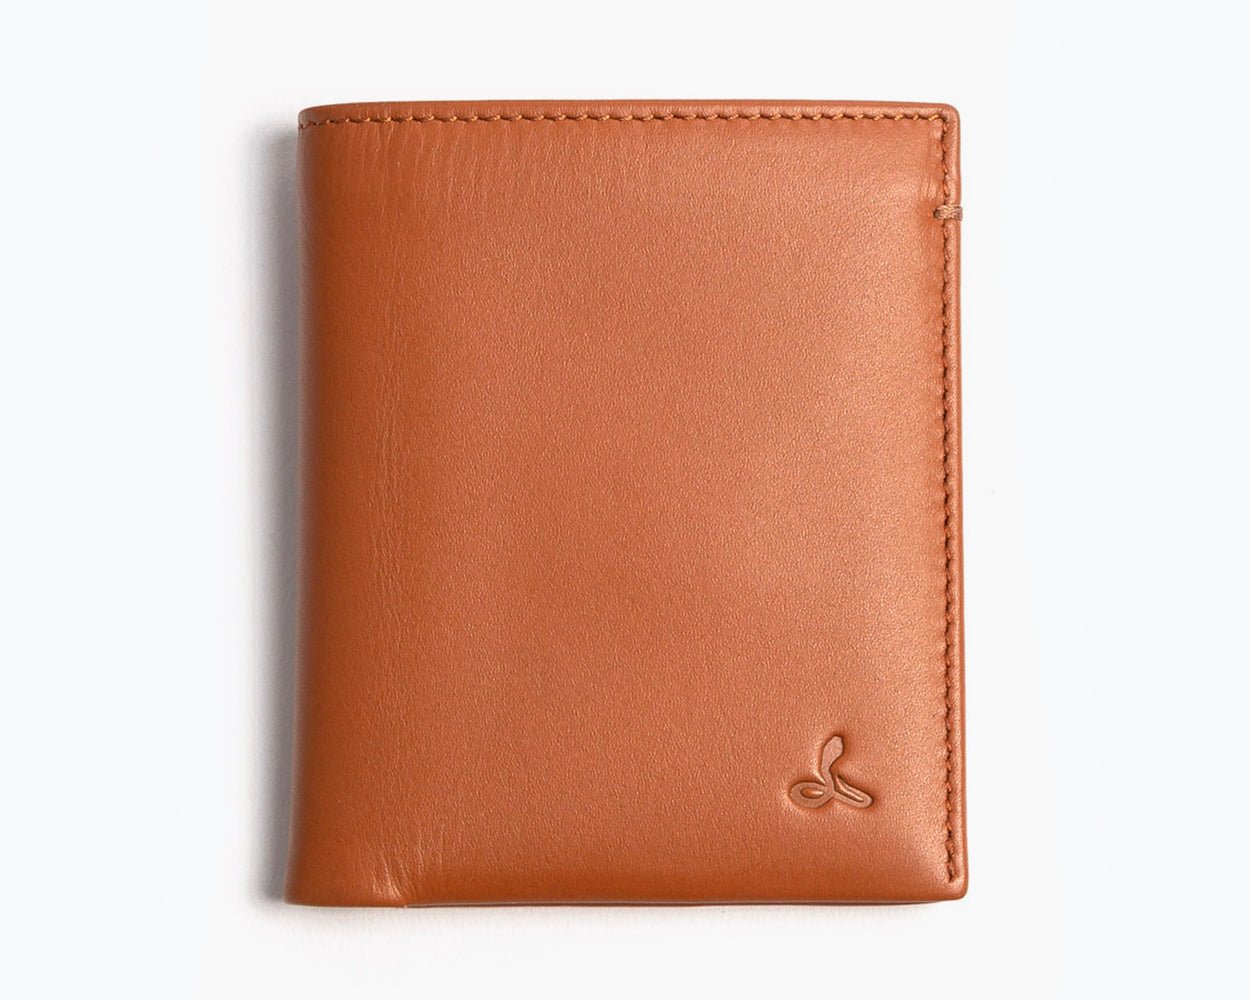 LEATHER BIFOLD WALLET - THE ESSENTIAL COLLECTION Tan/Cognac - Snakehive UK